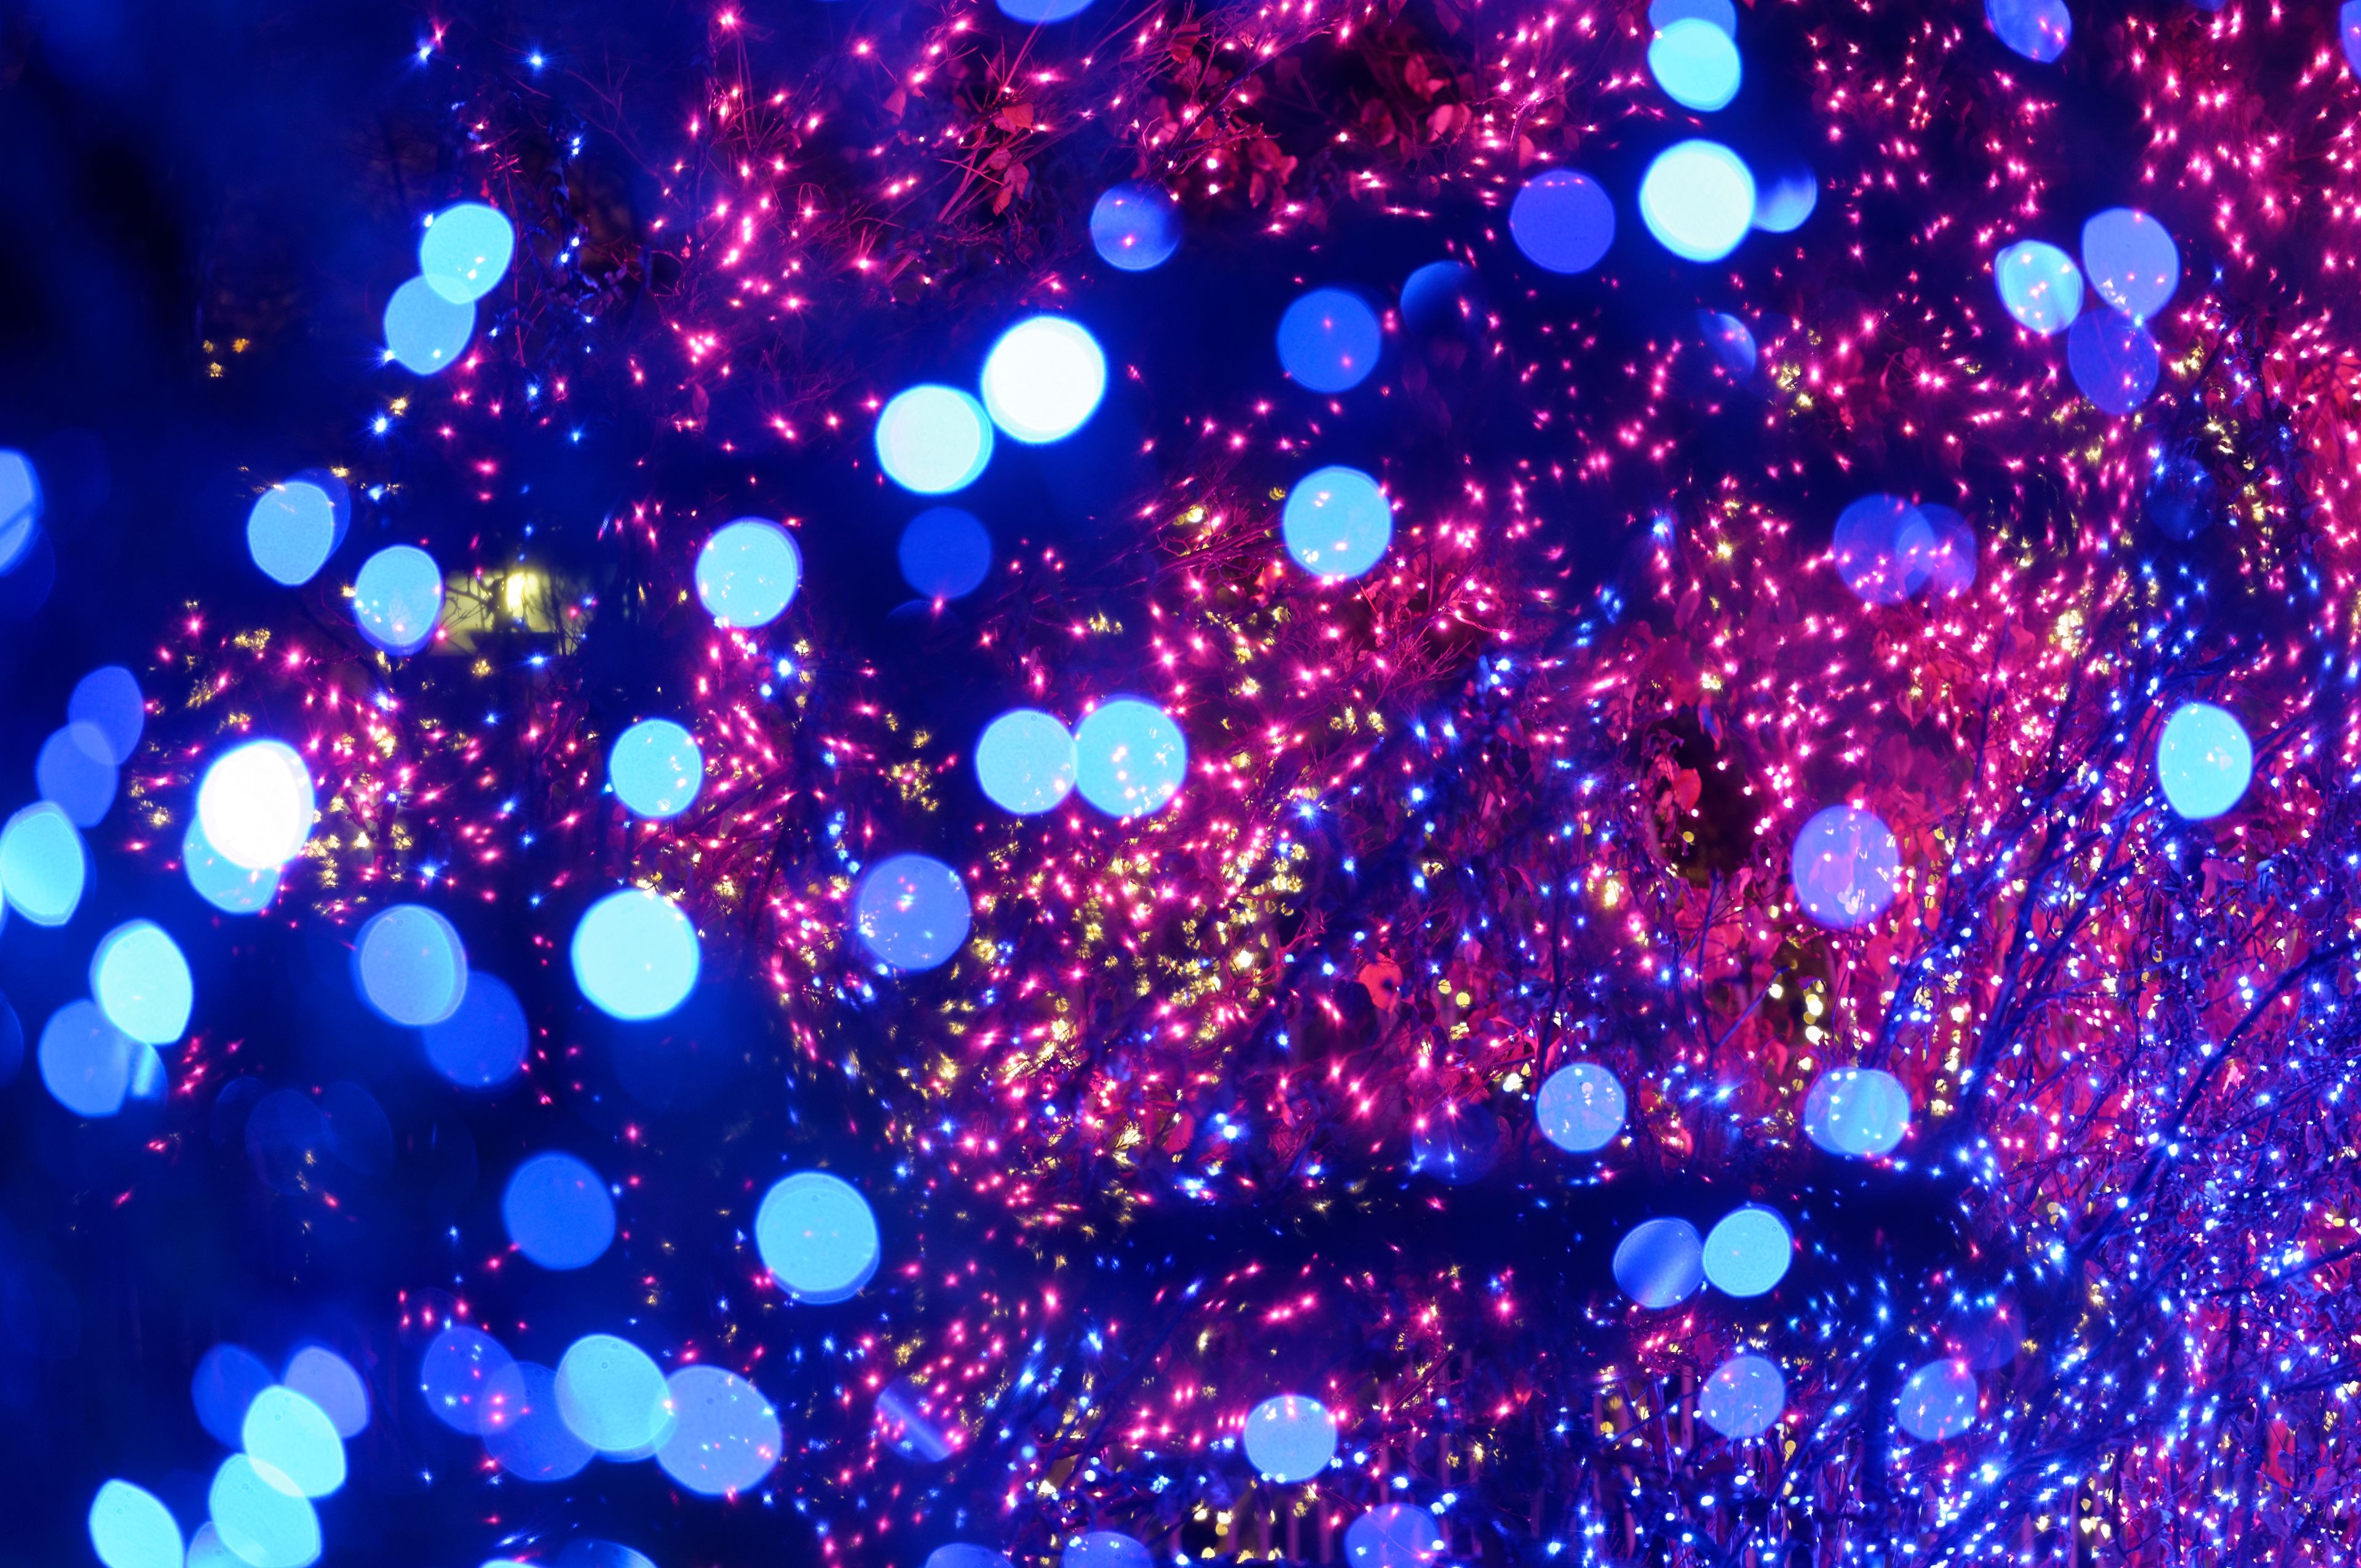 A close-up view of Christmas lights.